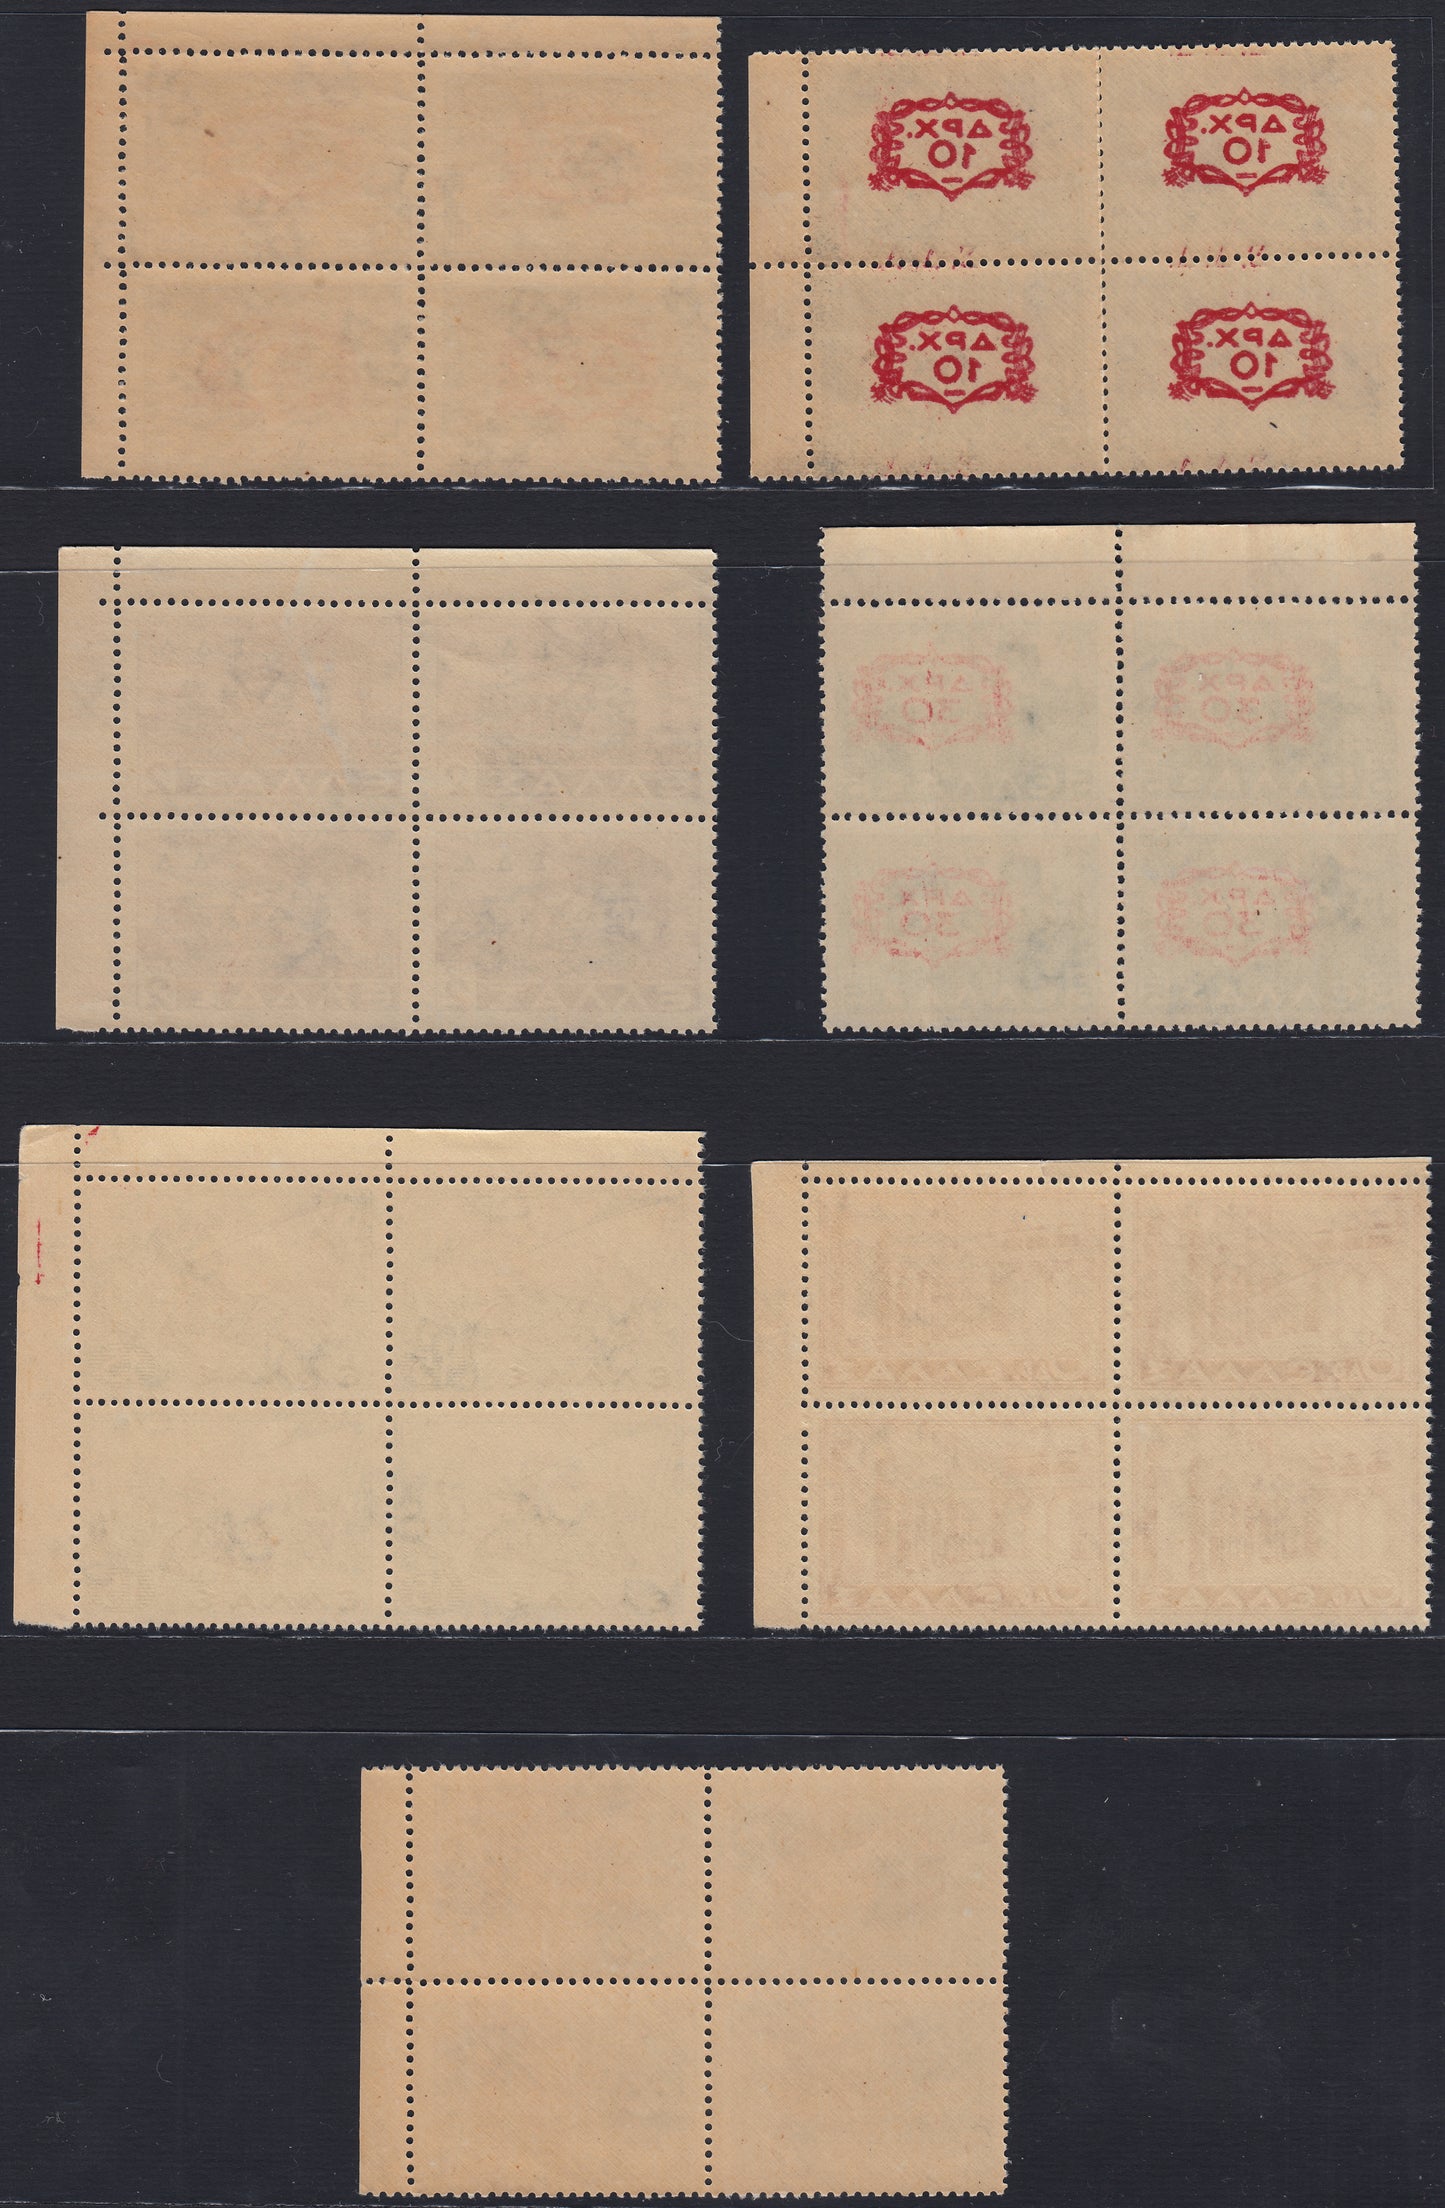 Dode3 - 1947 - Greek stamps with new value in overprint and further overprinted, complete set in four sets, new intact gum (2/7 + 8f) 